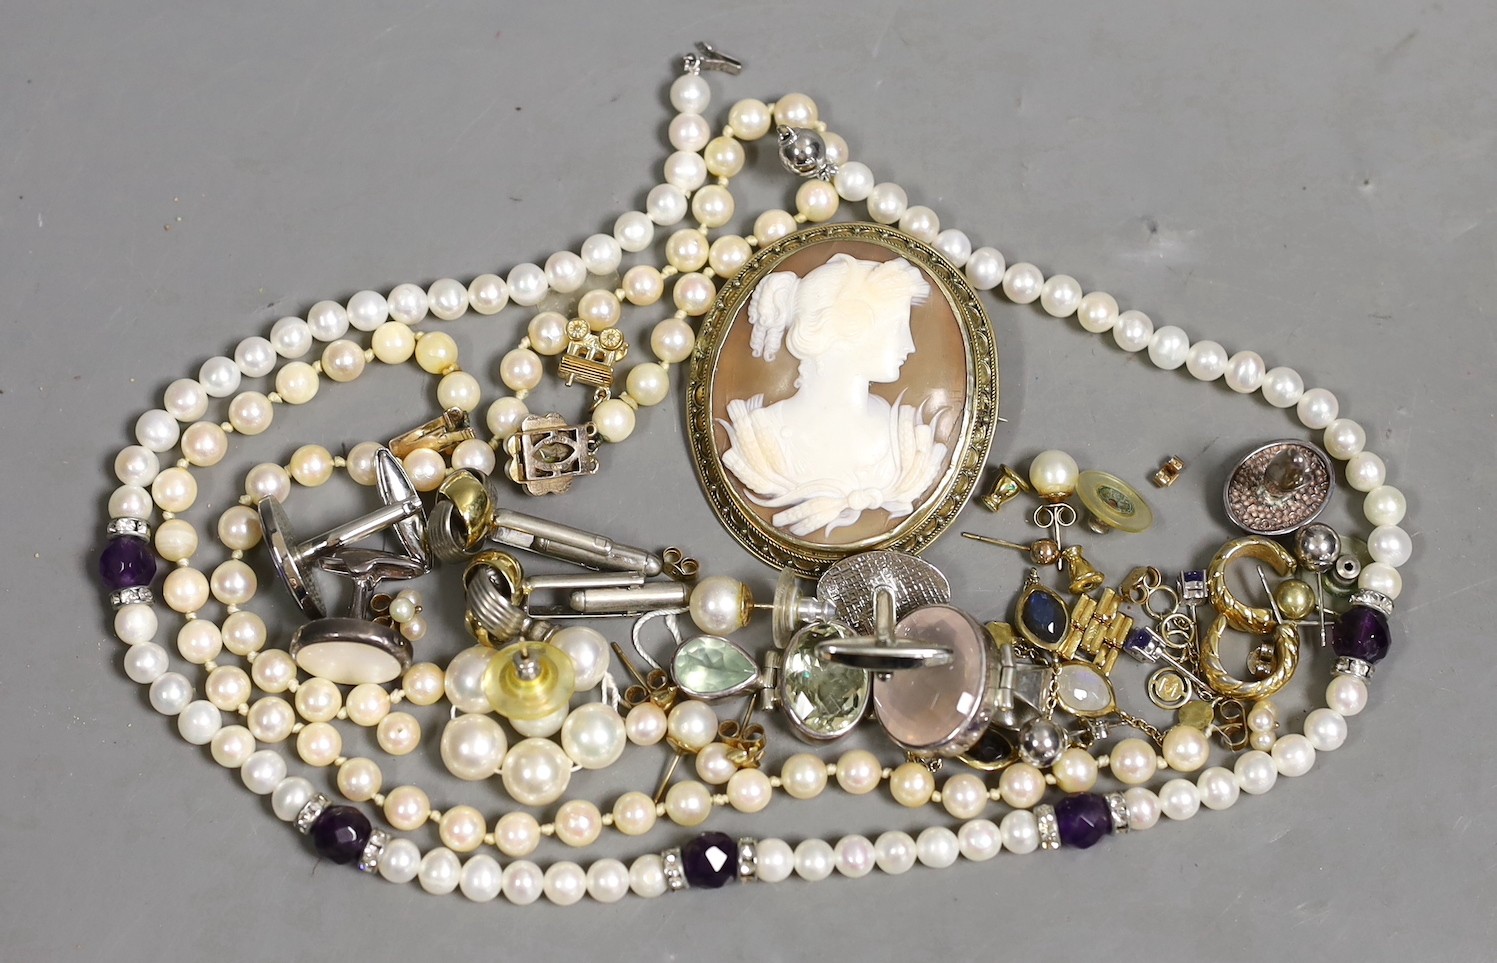 Sundry jewellery including a gilt white metal and gem set bracelet, a quartz set pendant, a 9ct gold charm, a cultured pearl and amethyst necklace, mounted cameo shell brooch and assorted cultured pearl ear studs etc.